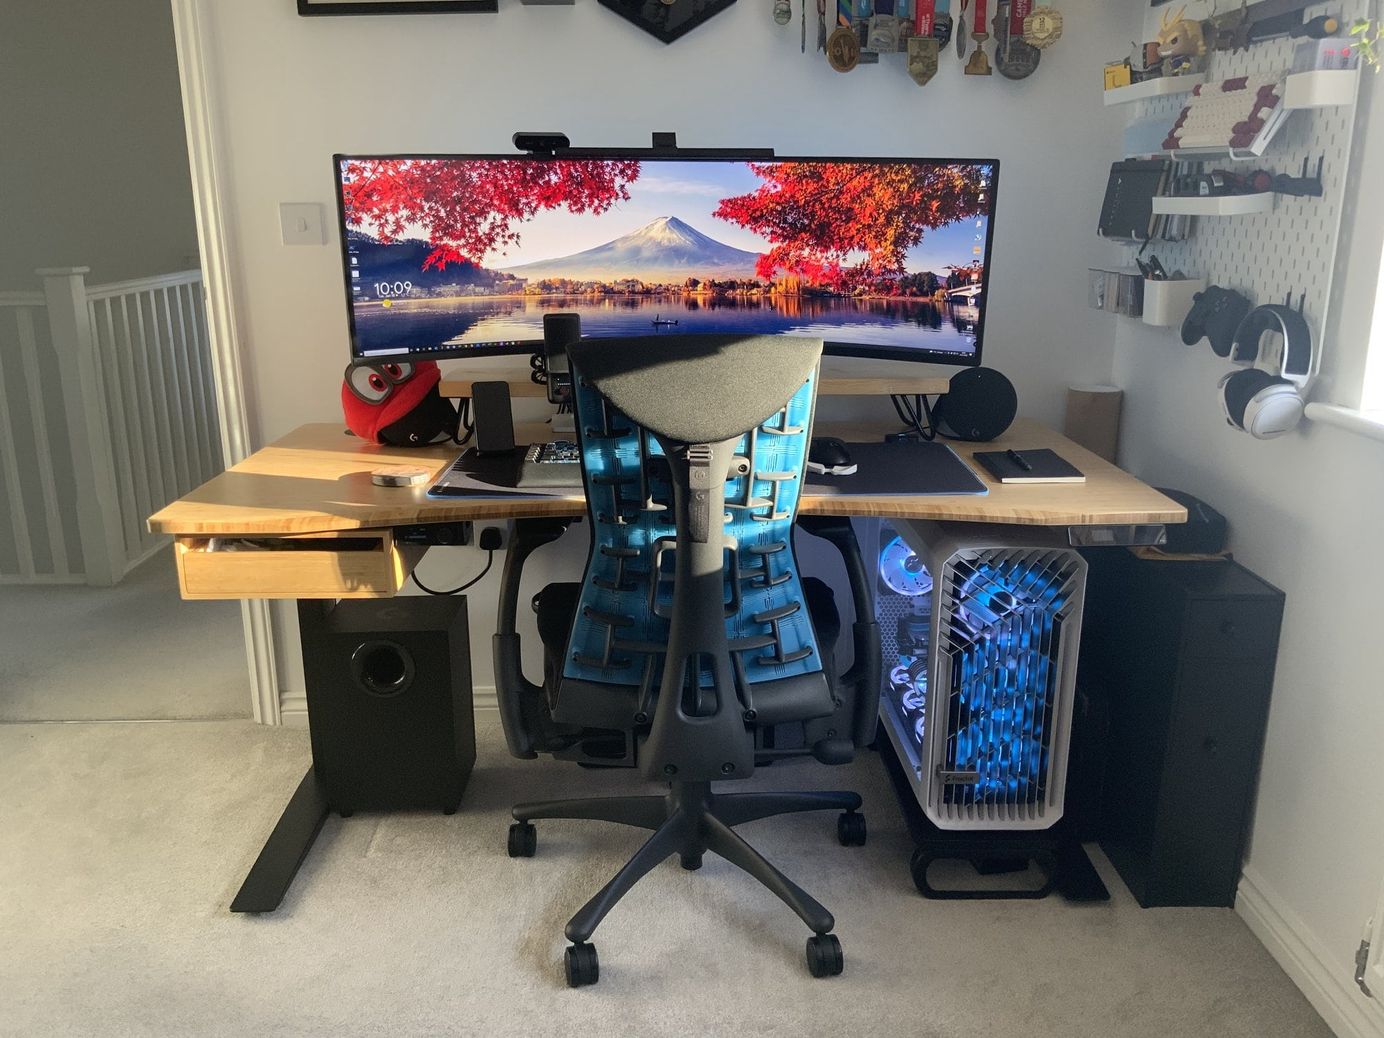 https://www.makerstations.io/content/images/size/w1384/2022/06/colin-chang-desk-setup-02-2.jpg